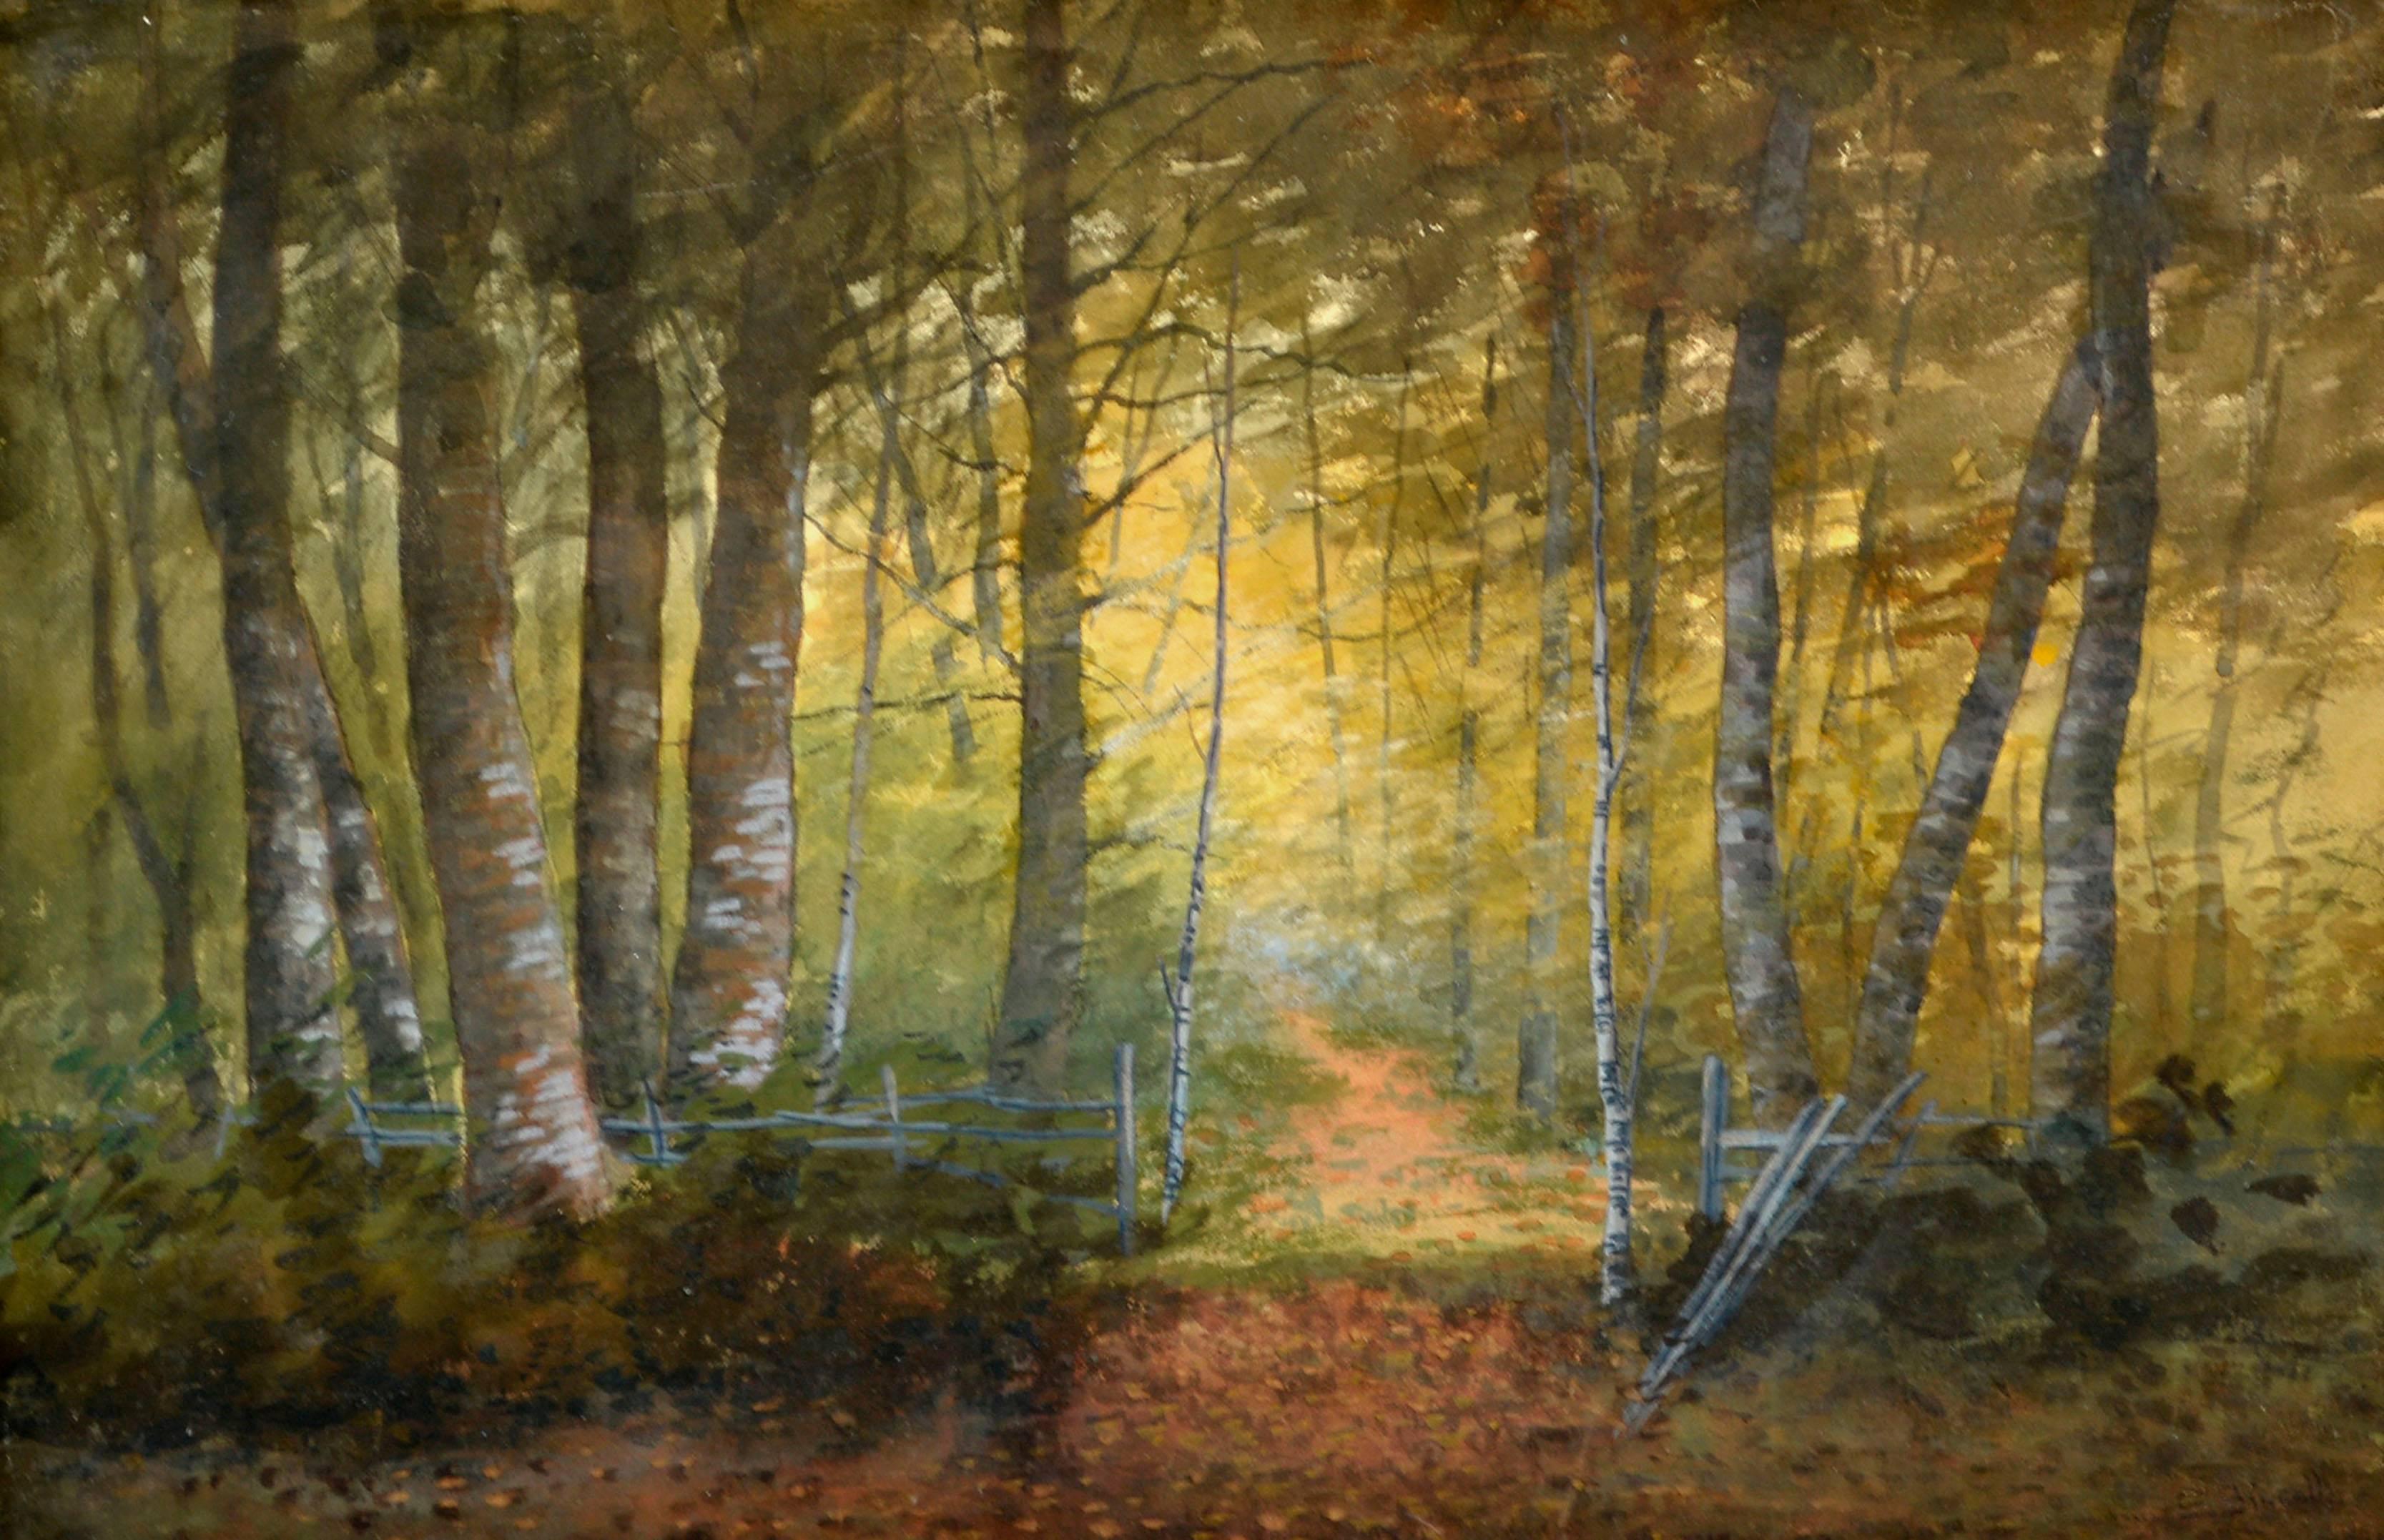 Turn of Century Birch Forest Glow Suffolk County, New York Landscape - Painting by Susan Field Bissell